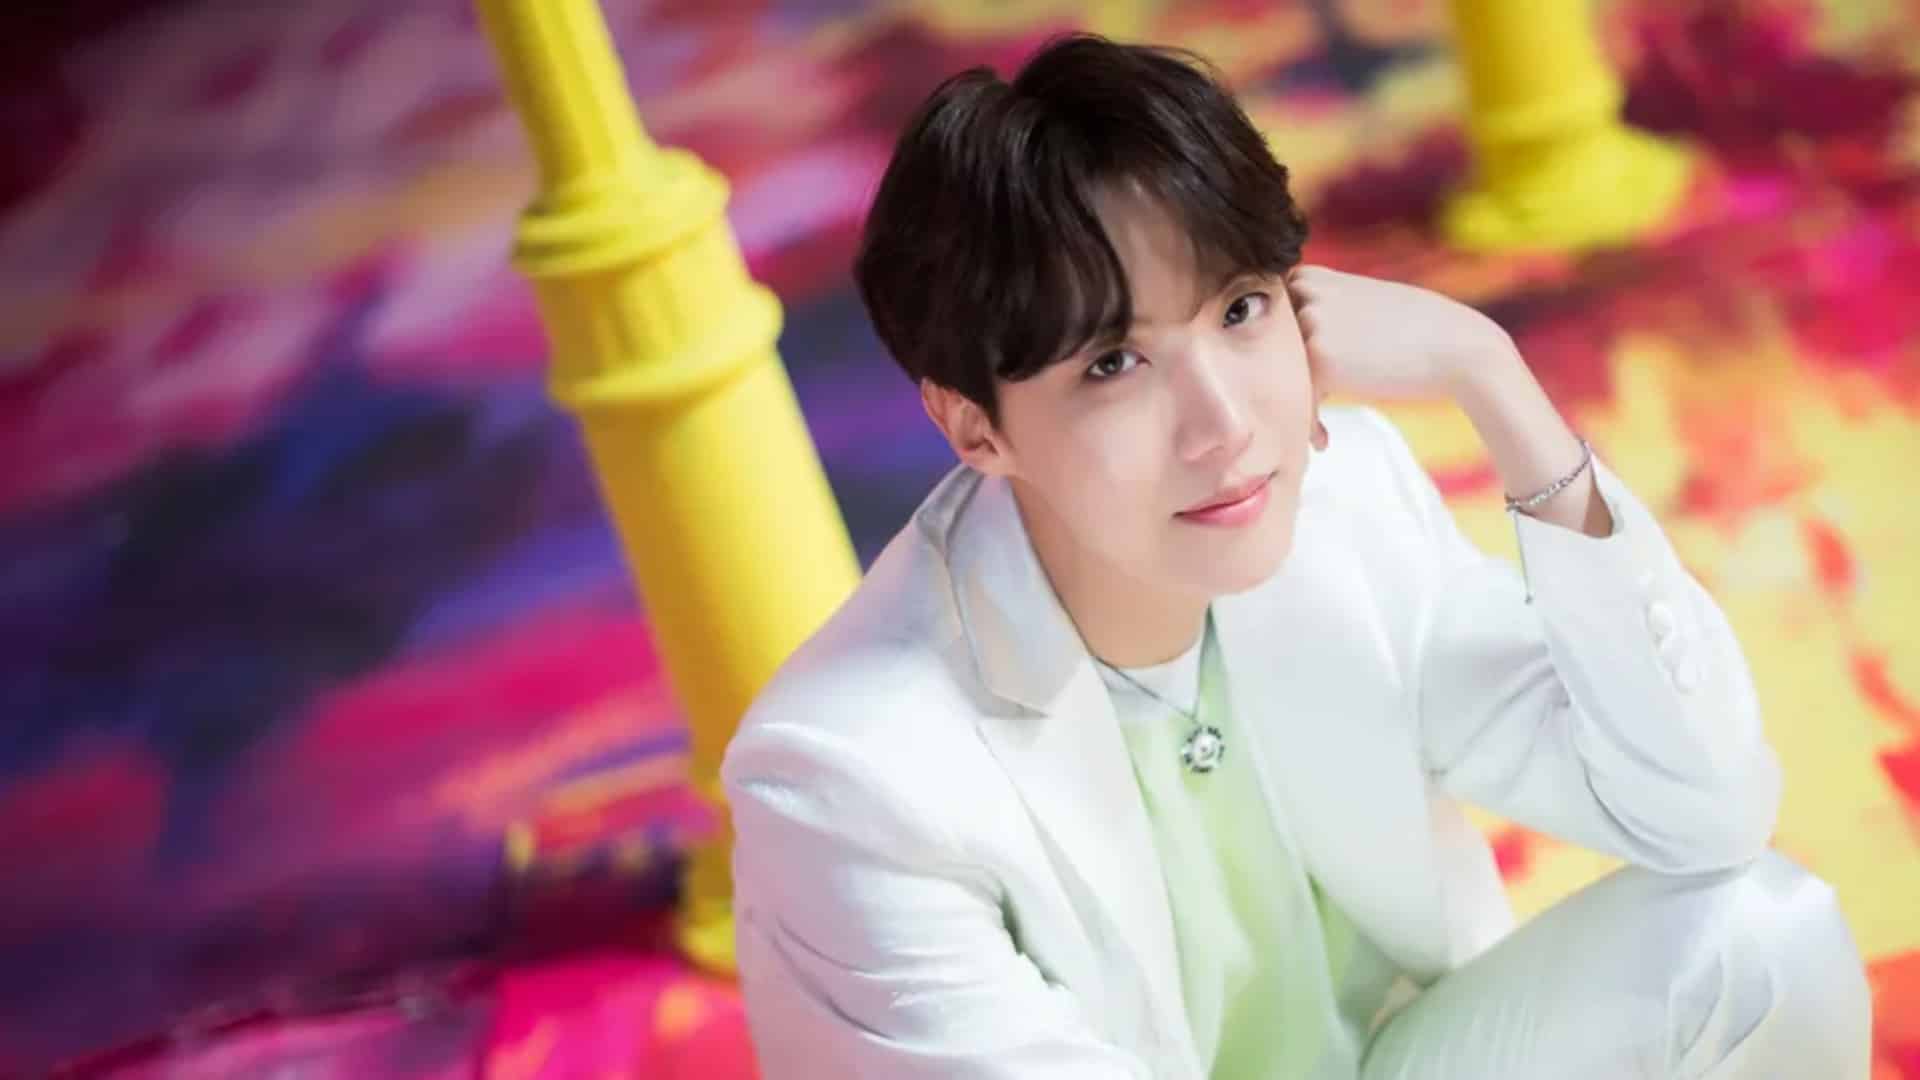 Boy with luv J Hope from BTS